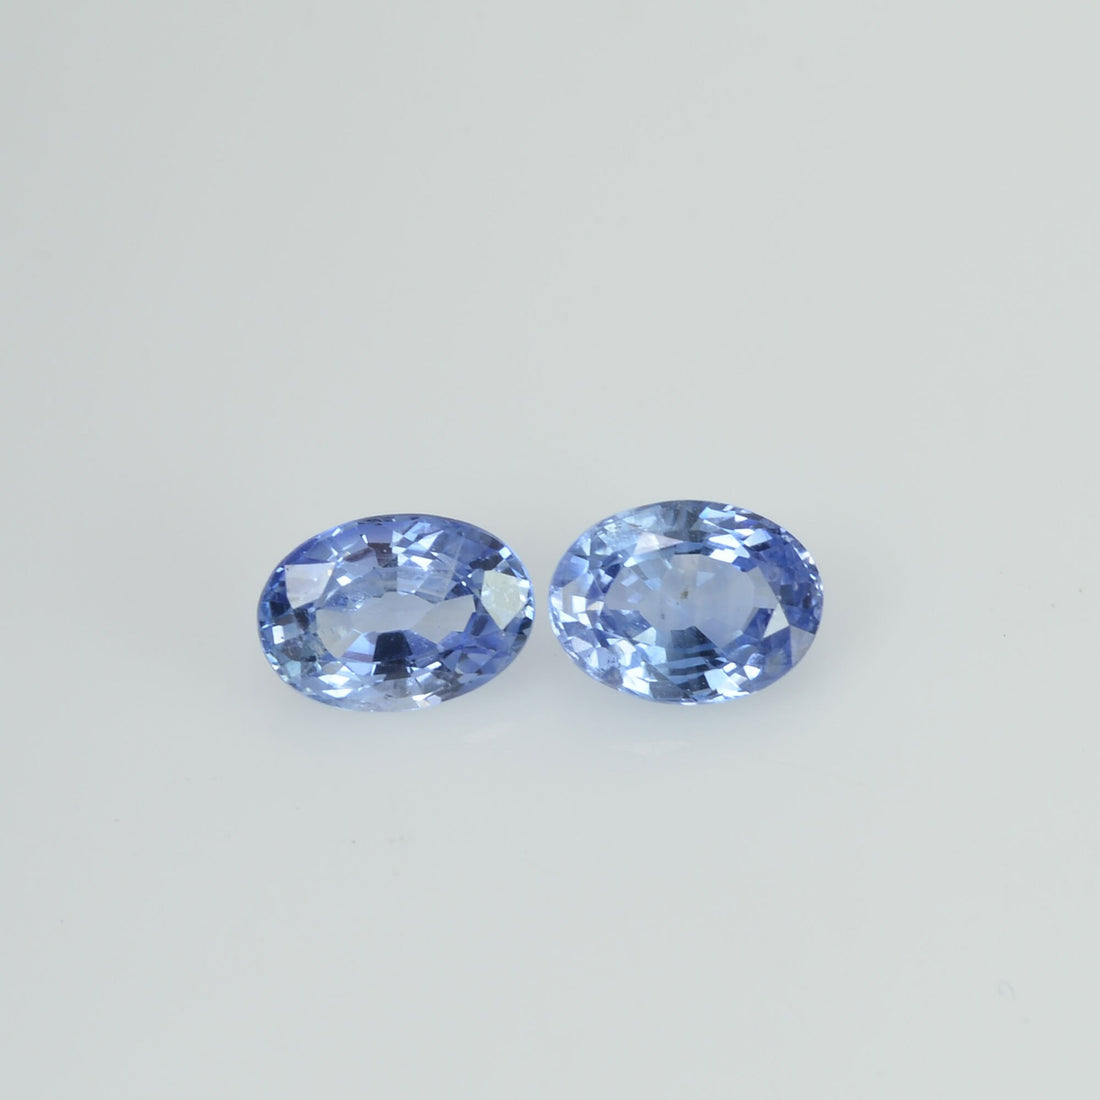 1.41 cts Natural Blue Sapphire Loose Pair Gemstone Oval Cut